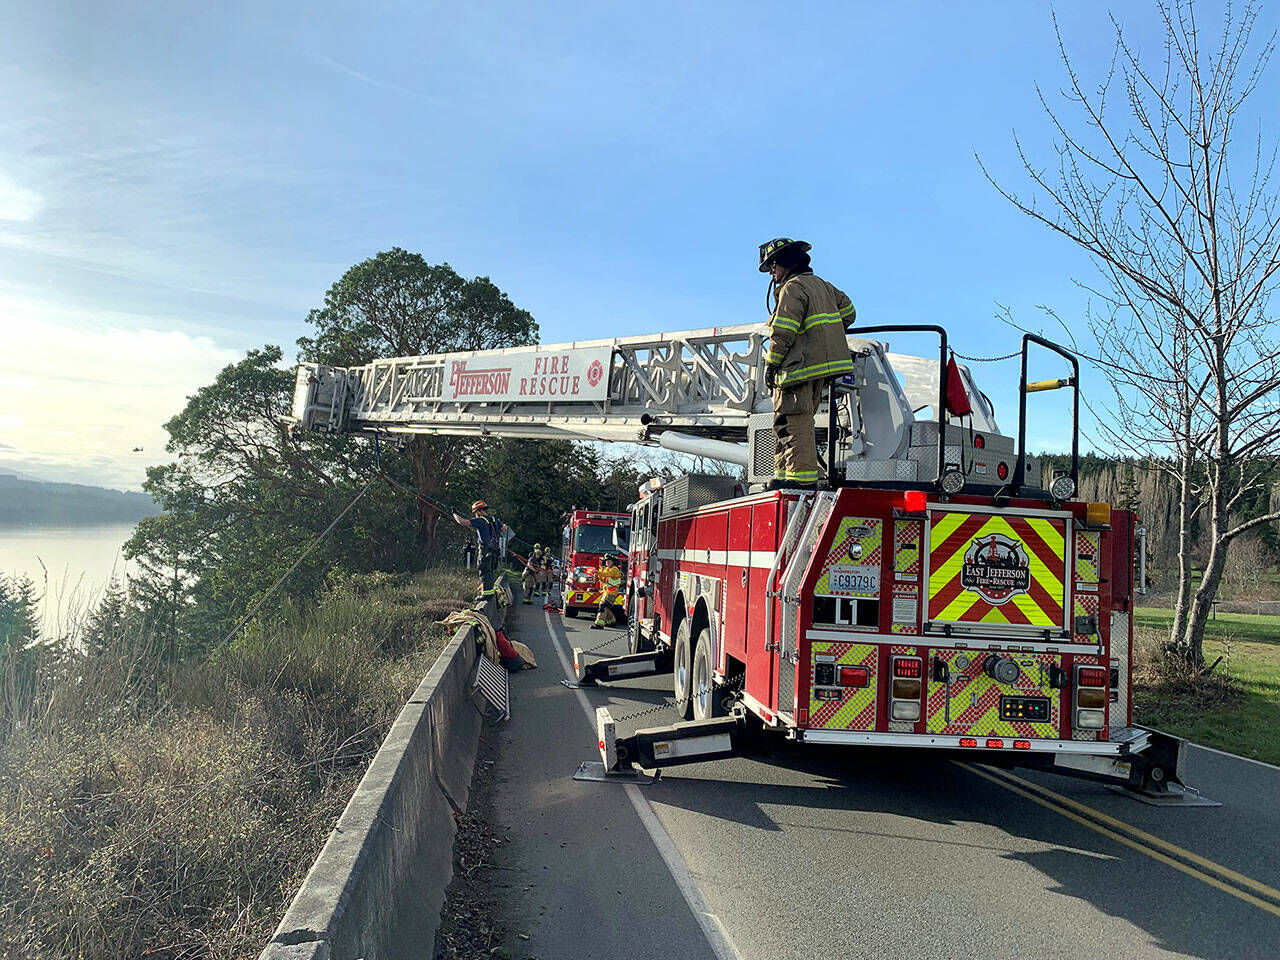 Members of East Jefferson Fire-Rescue rescued an injured driver who was ejected from their vehicle when it went over a cliff on South Discovery Road on Wednesday. (East Jefferson Fire Rescue)